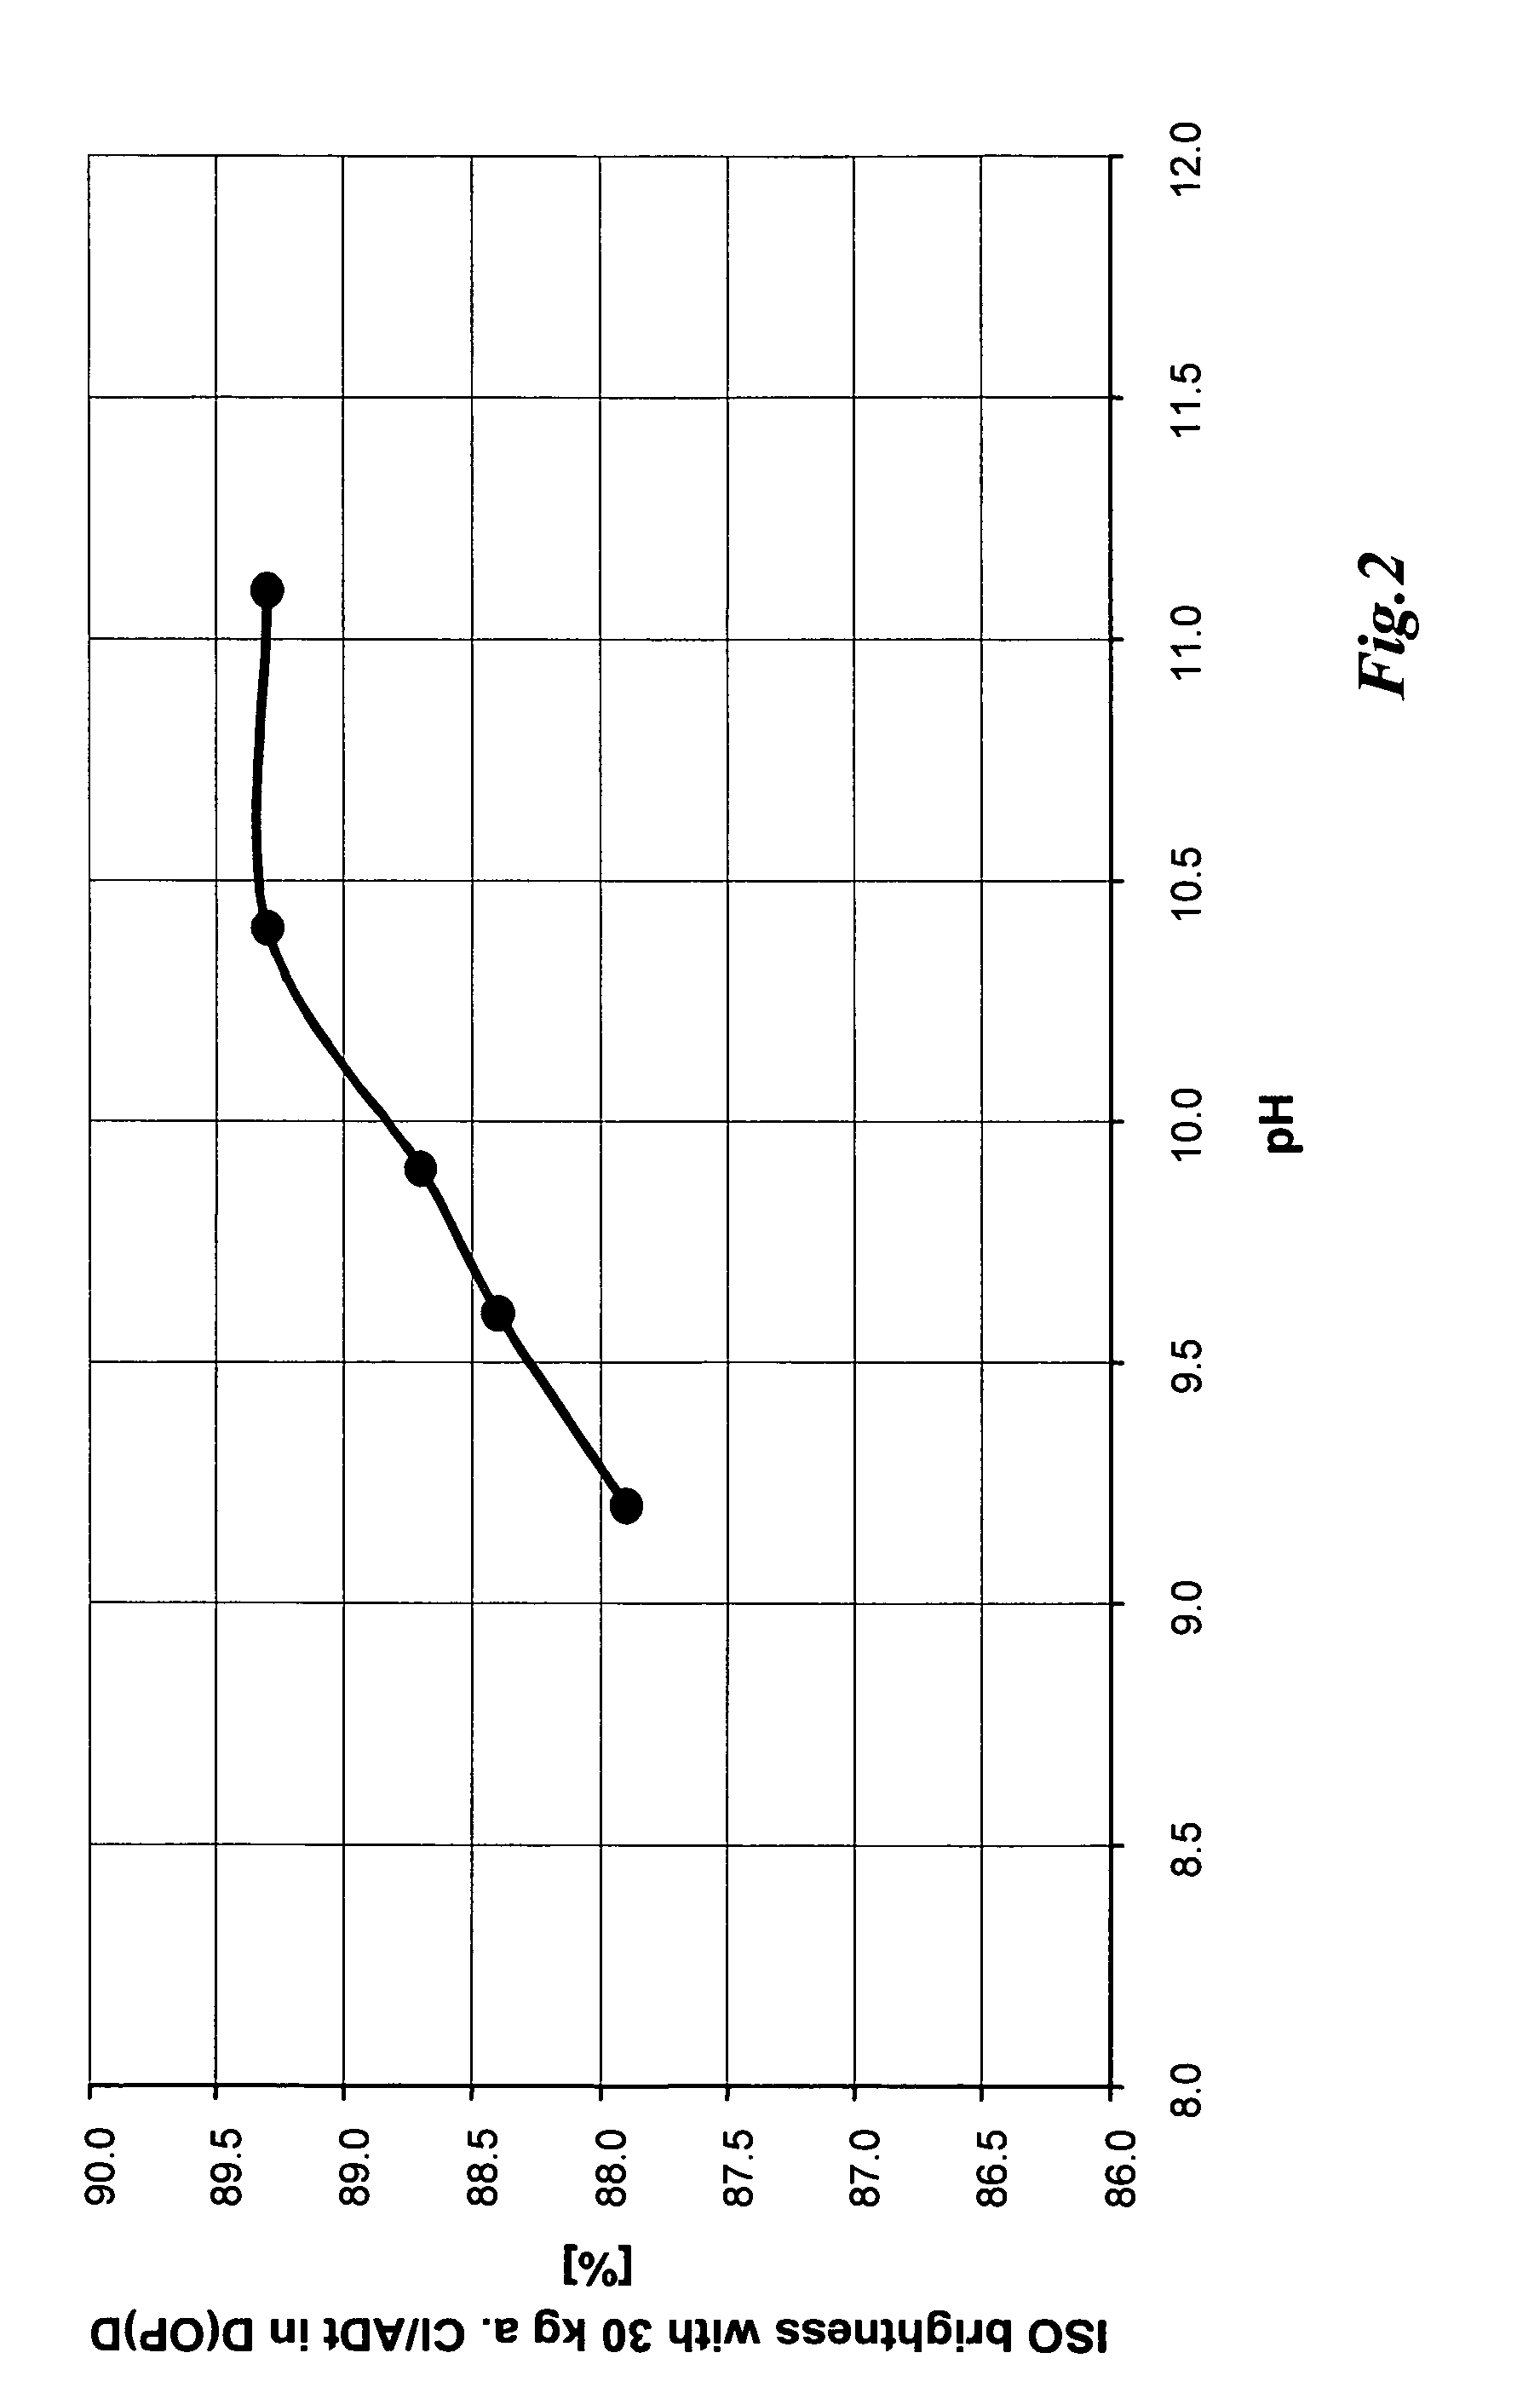 Method and arrangement for oxygen delignification of cellulose pulp